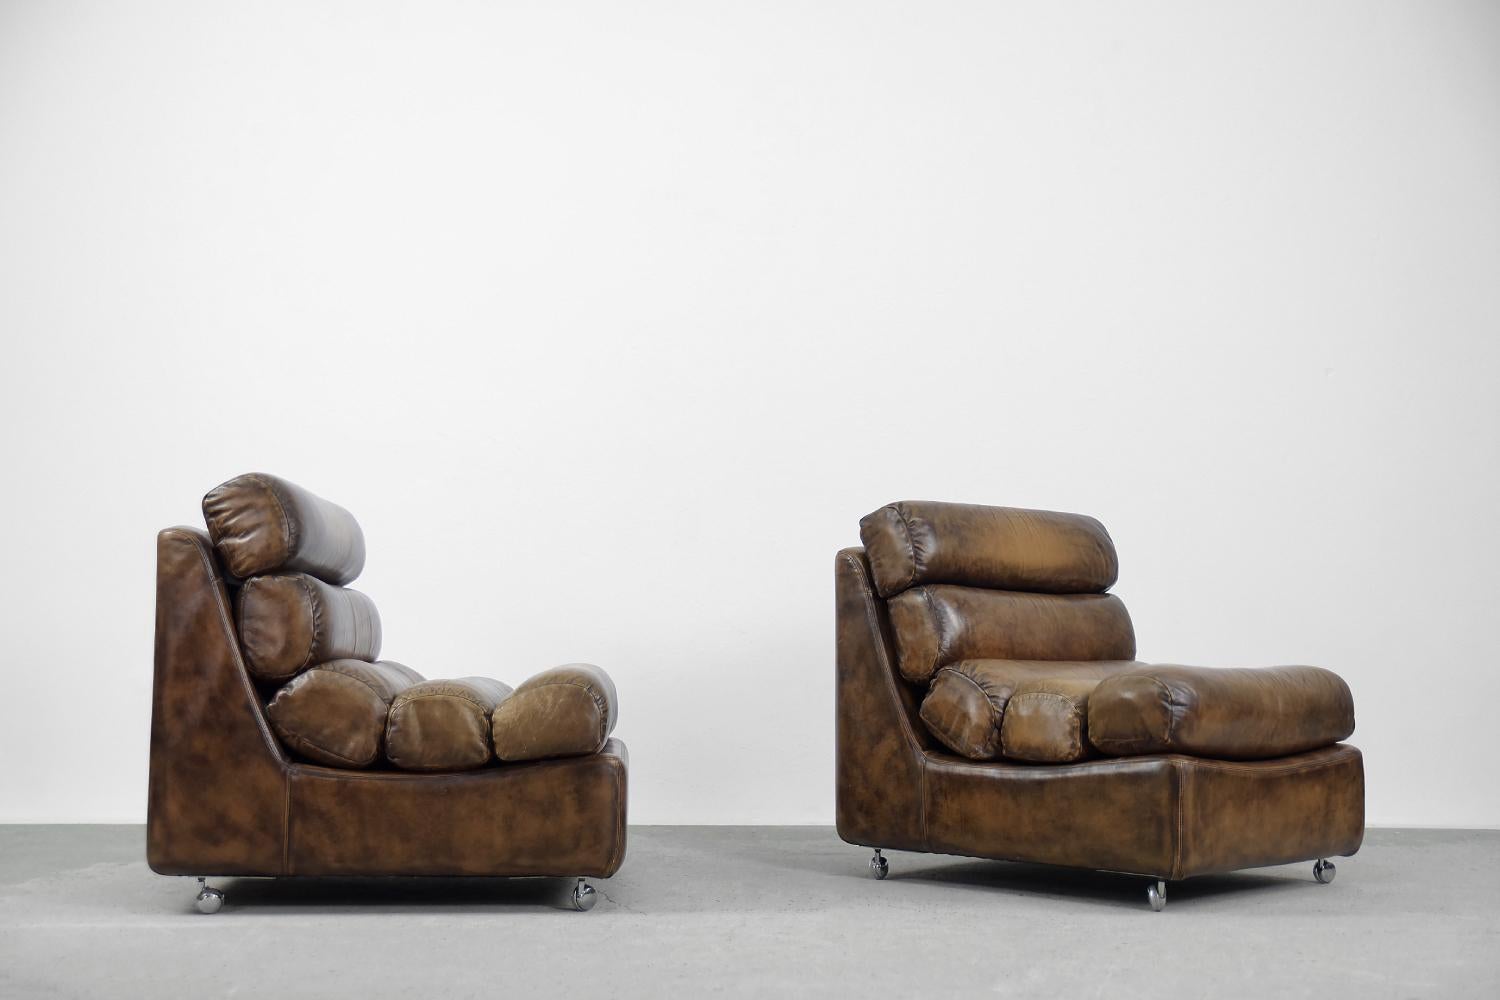 Pair of Rare Vintage Brutalist Dark Brown Leather Armchairs on Wheels, 1960s For Sale 6